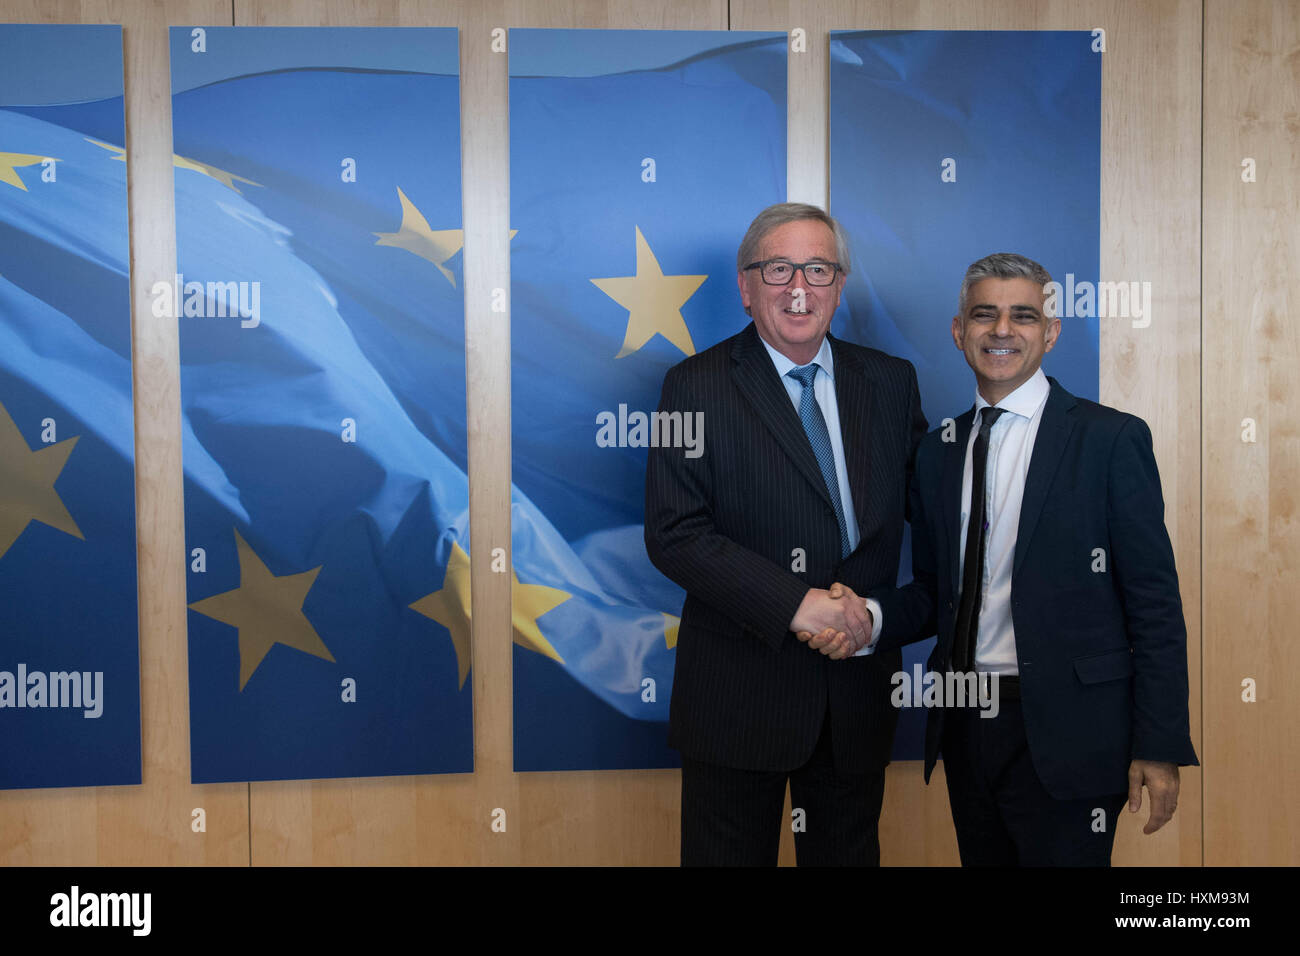 Mayor of London Sadiq Khan meets Jean-Claude Juncker, President of the European Commission at the European Commission in Brussels during the mayor's three day visit to Paris and Brussels where he will meet EU leaders and officials to talk about Brexit and the recent terror attack in London. Stock Photo